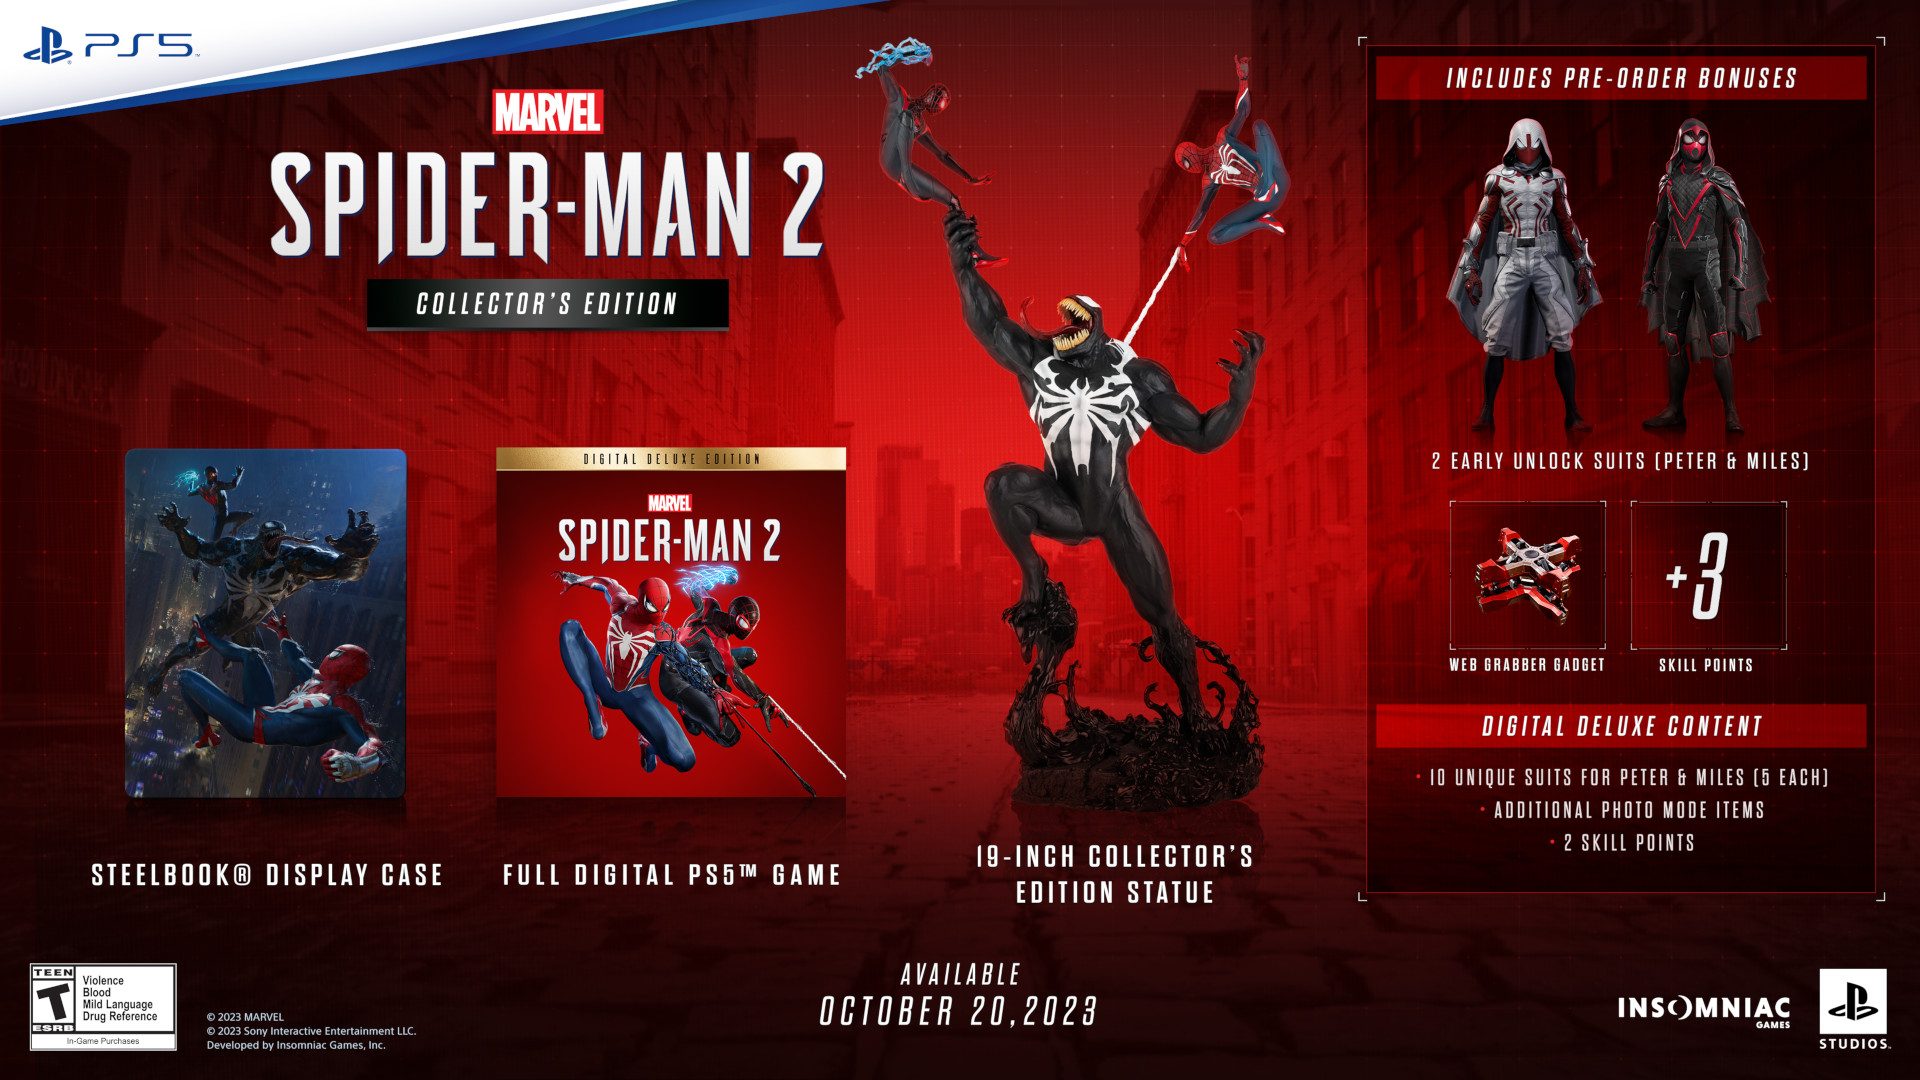 NEW PS5 Marvel's Spider-Man Spiderman 2 (HK, English/ Chinese) + DLC